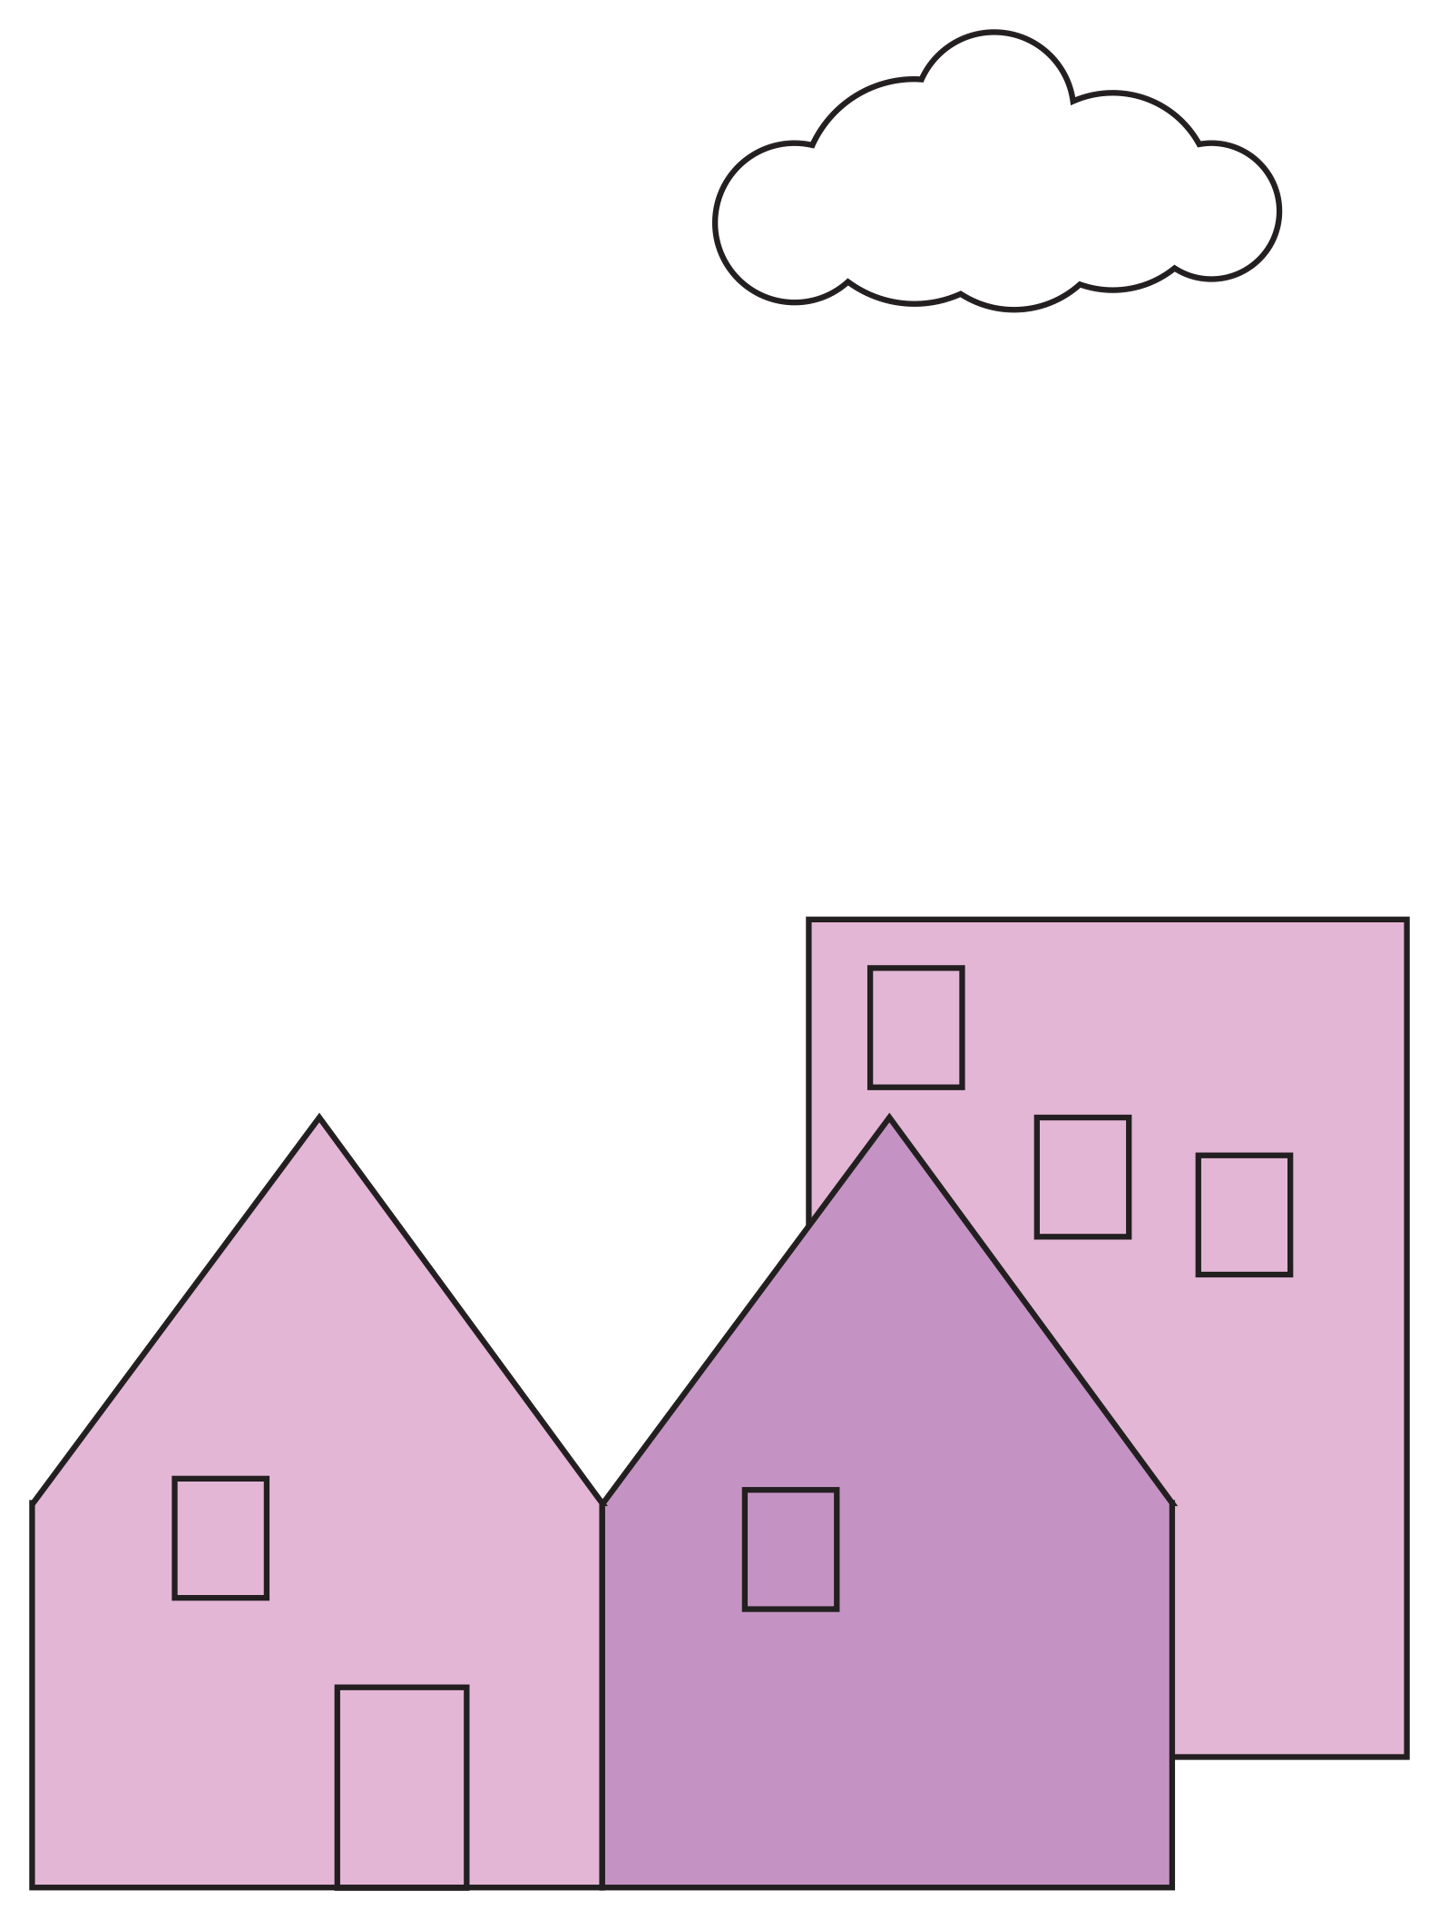 White, Window, House, Rectangle, Building, Slope, Pink, Font, Line